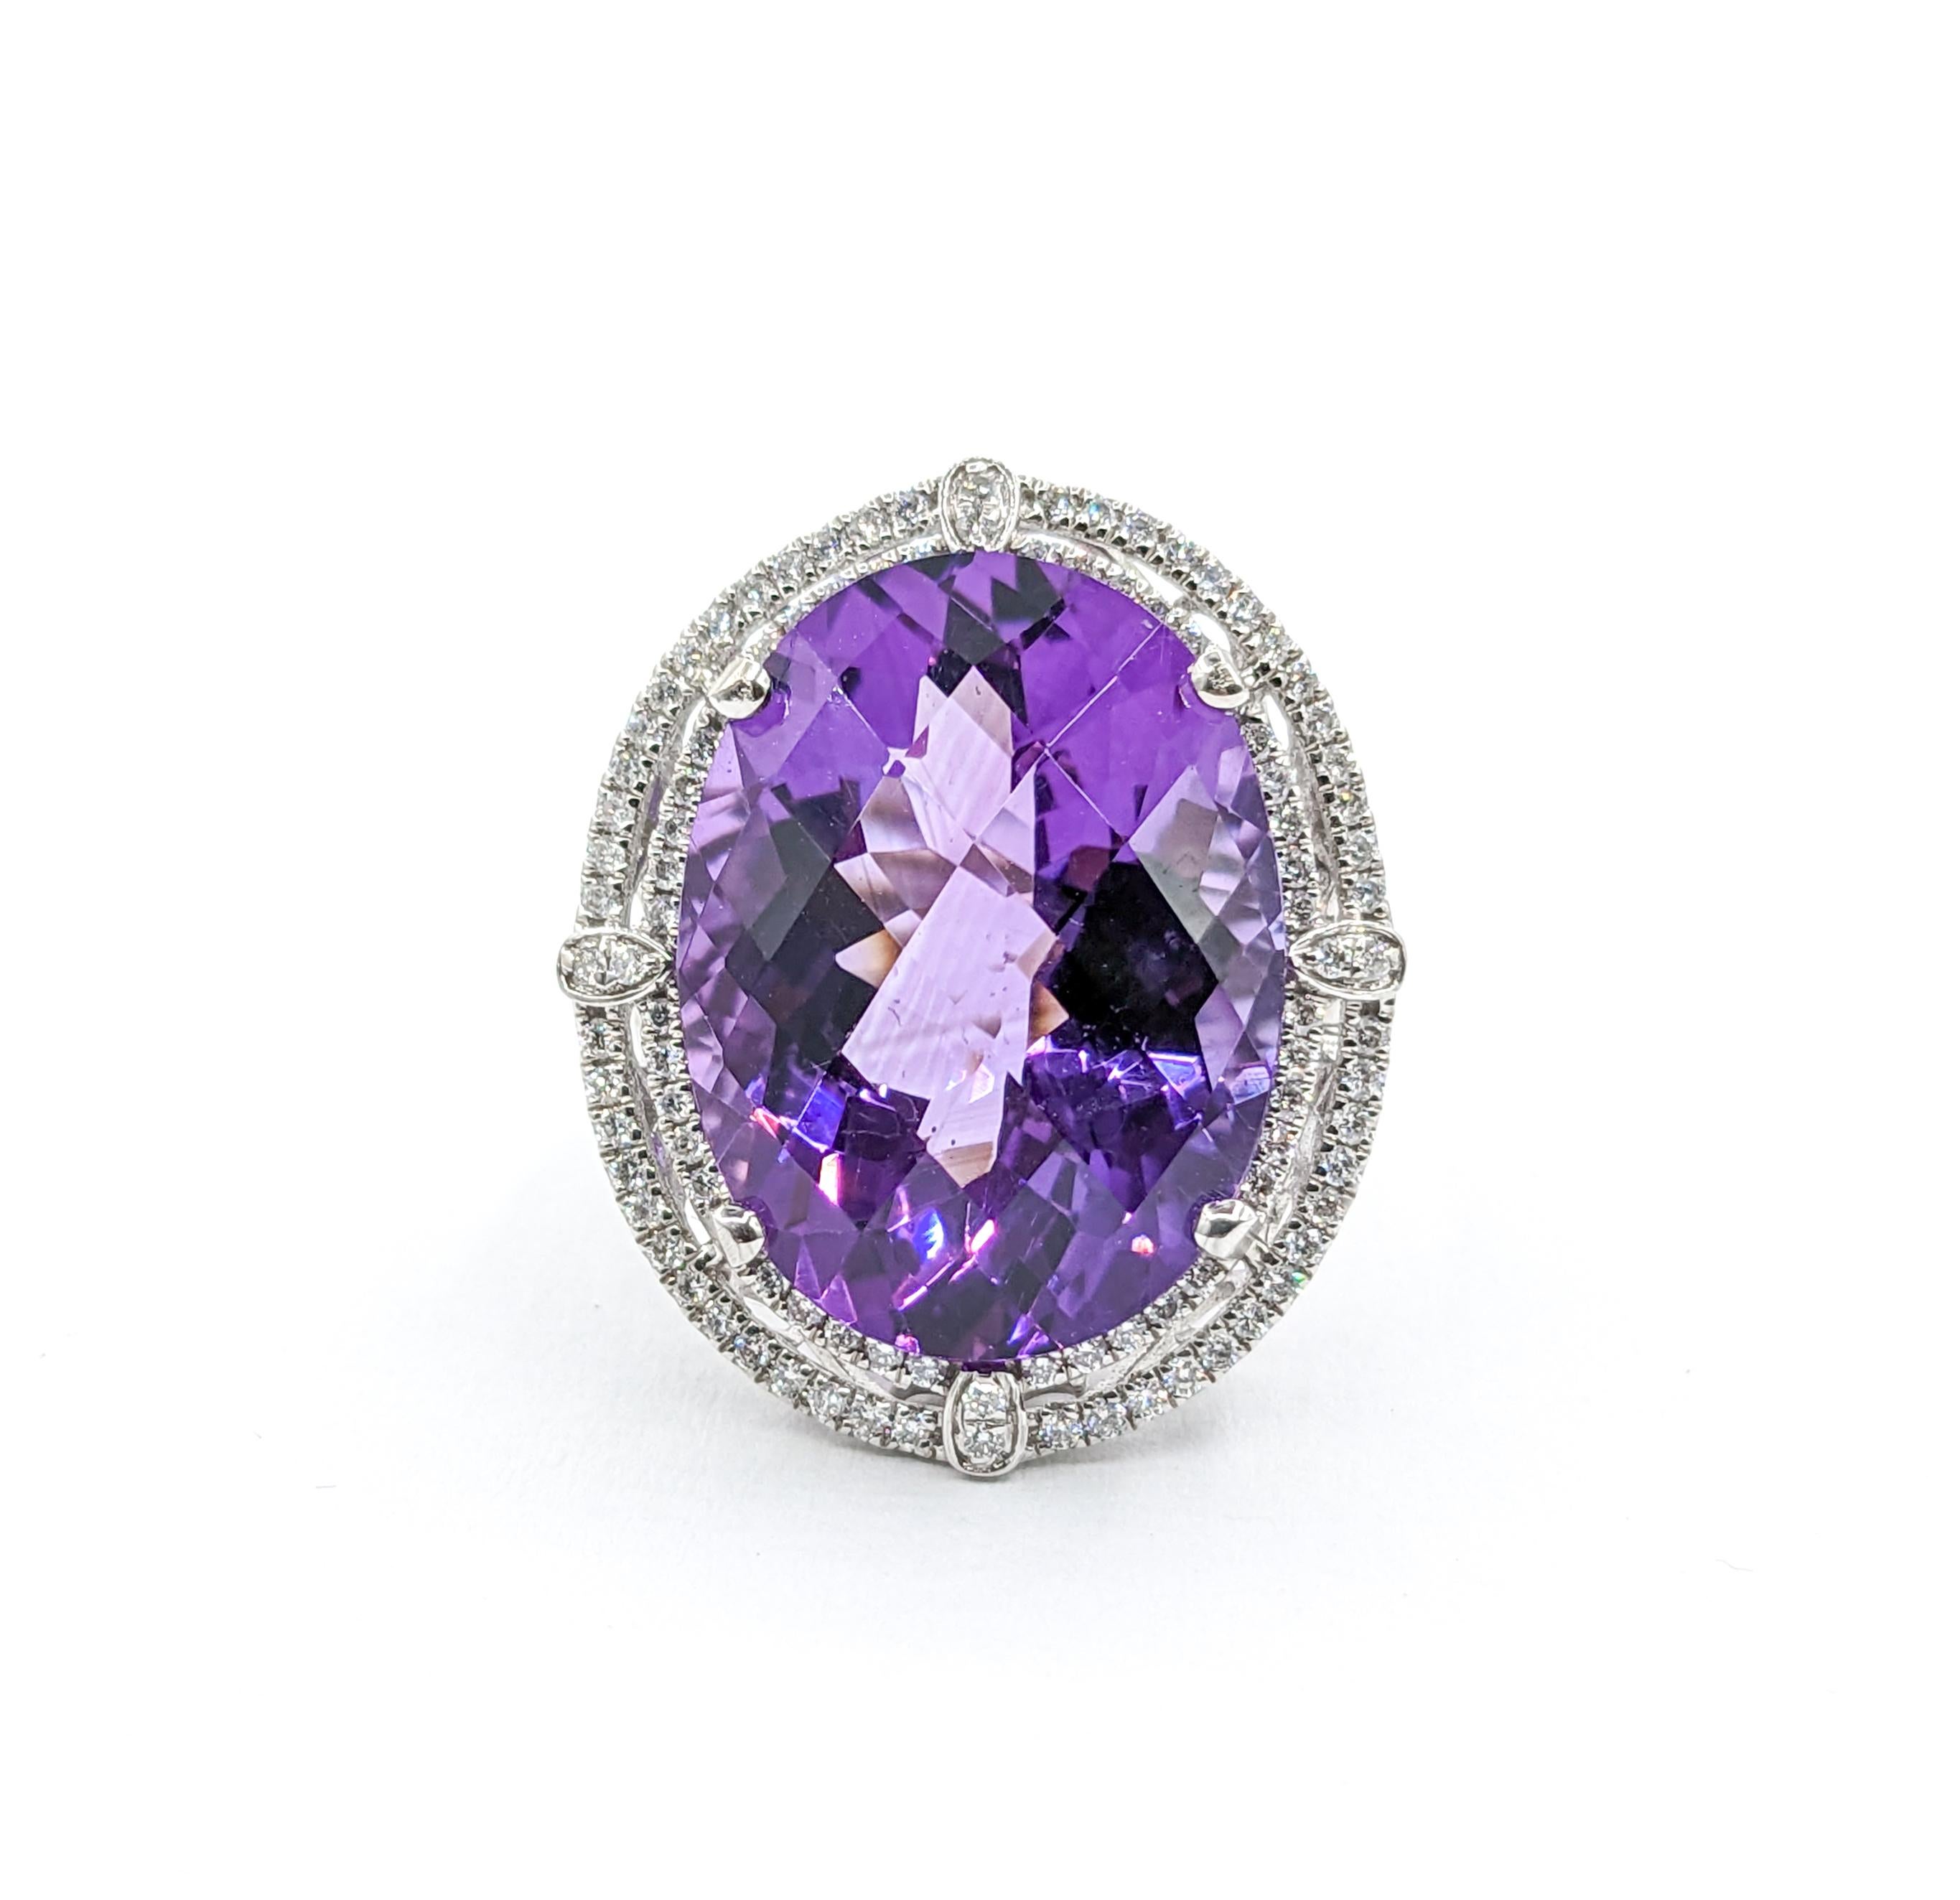 16.68ct Amethyst & Diamonds Ring In White Gold

Introducing this stunning Amethyst Ring, masterfully crafted in 14k white gold and adorned with .68ct of dazzling diamonds. The highlight of this exquisite piece is a magnificent 16.68ct amethyst,